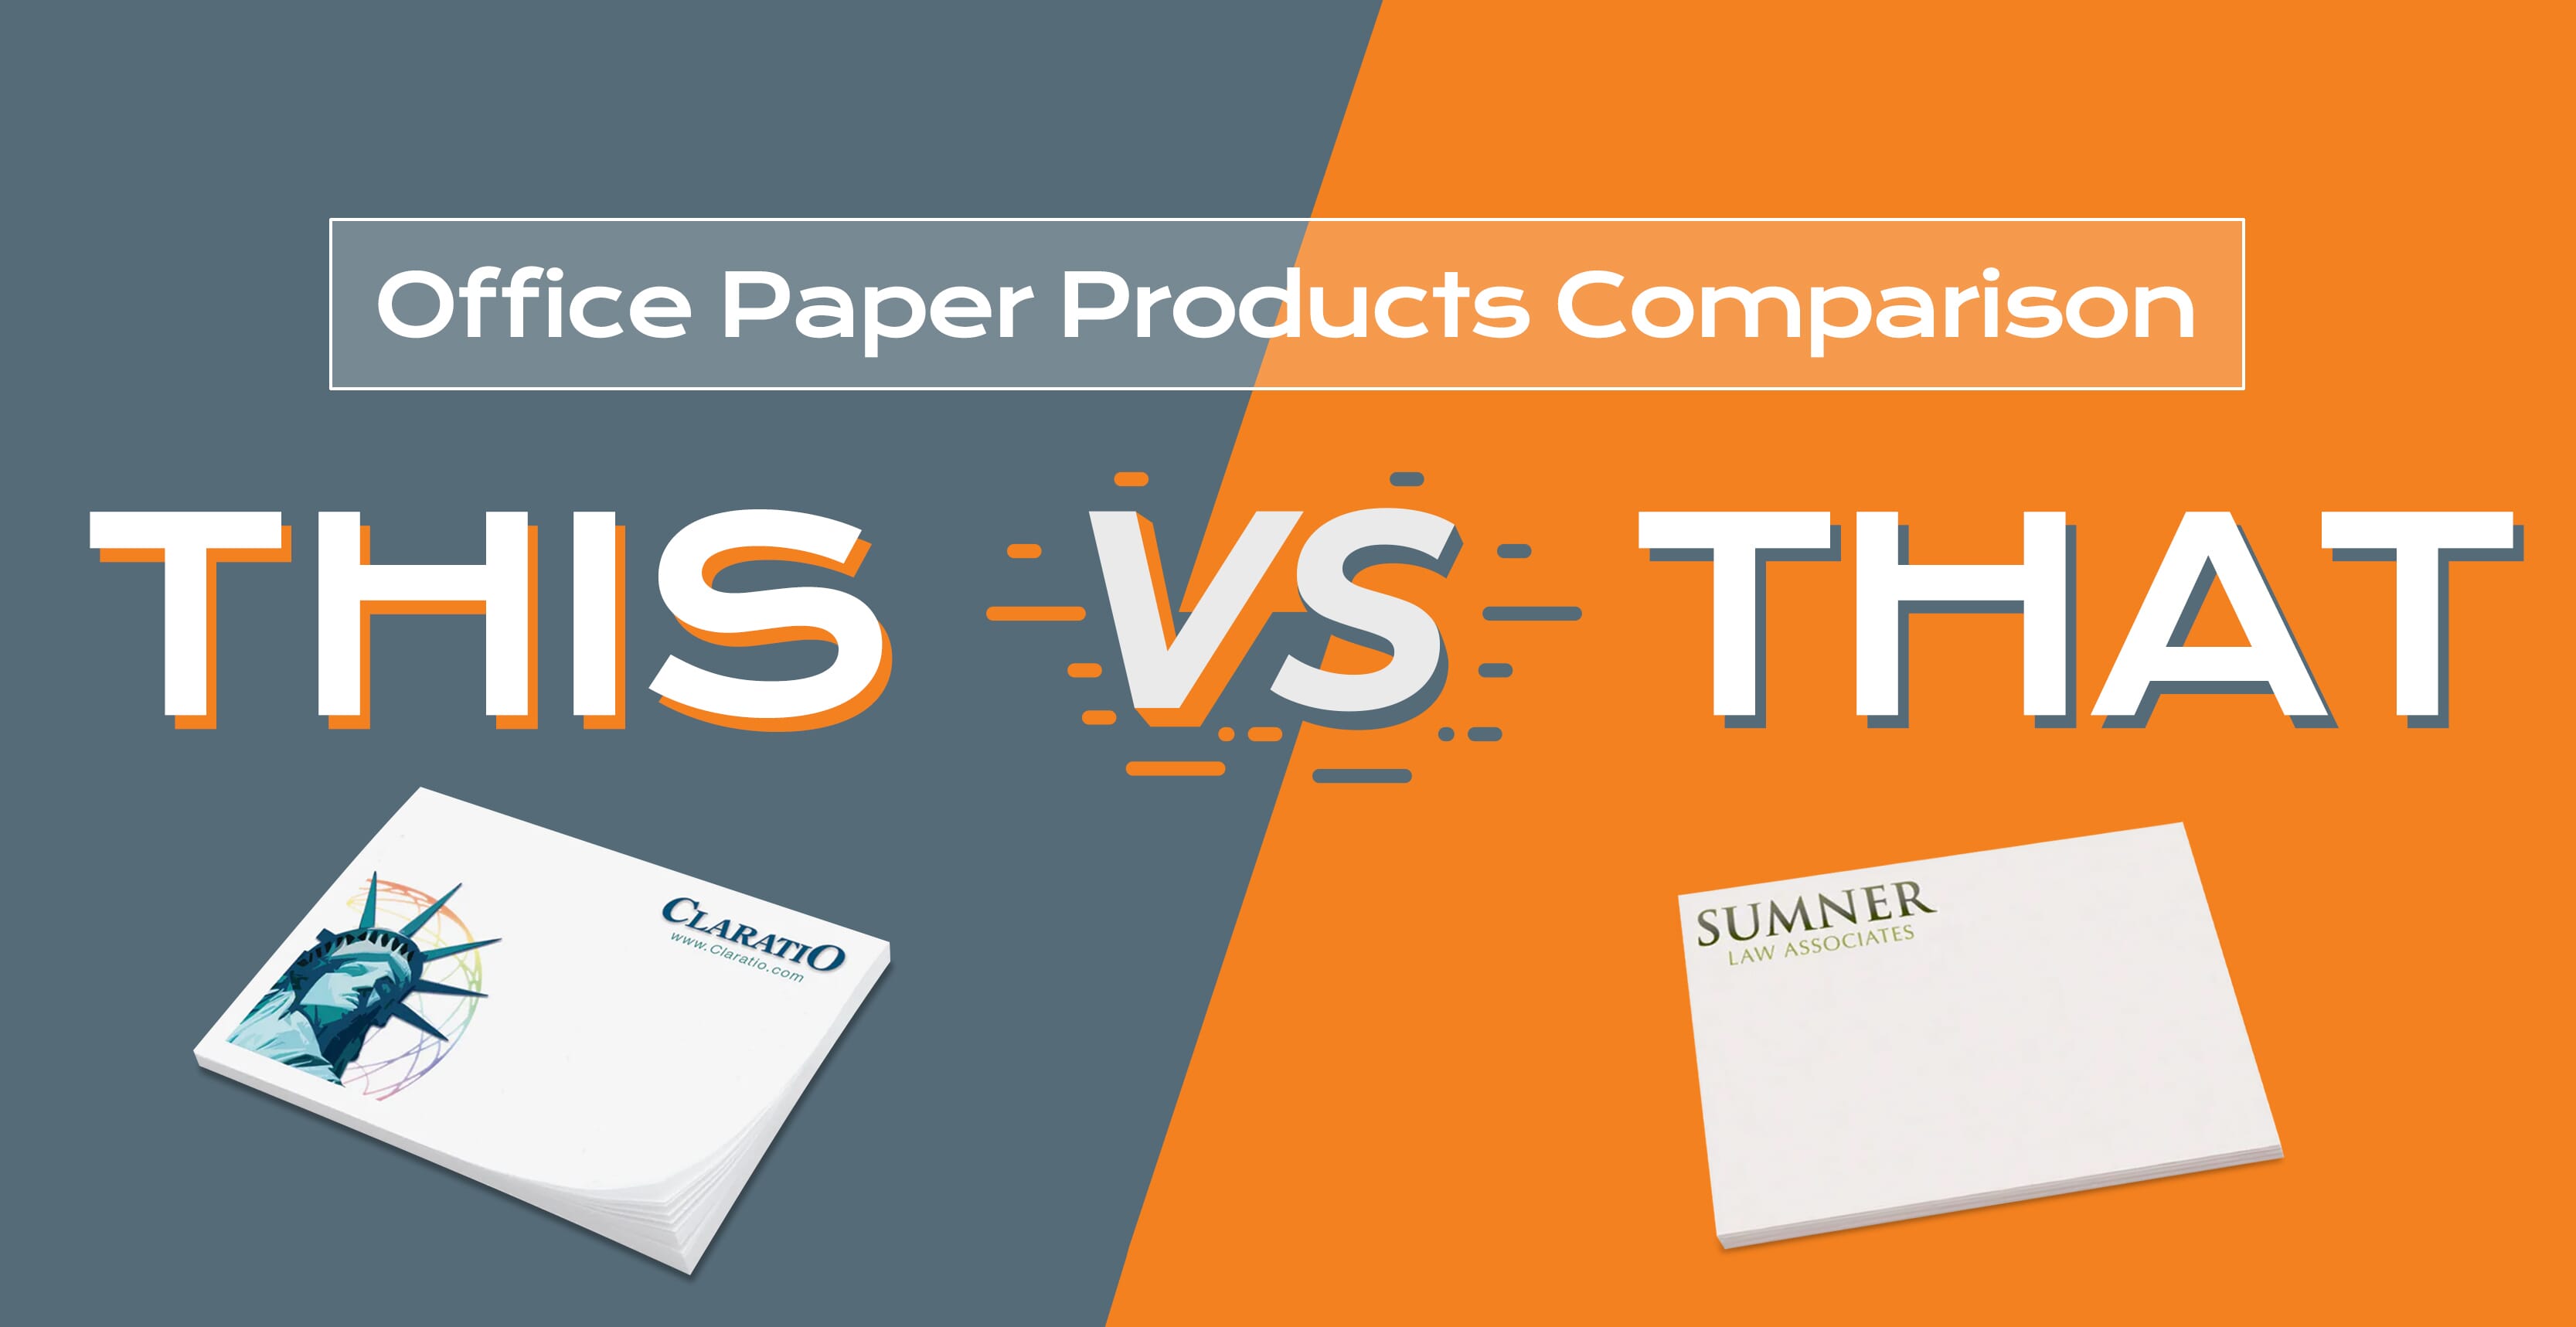 Office paper products comparison